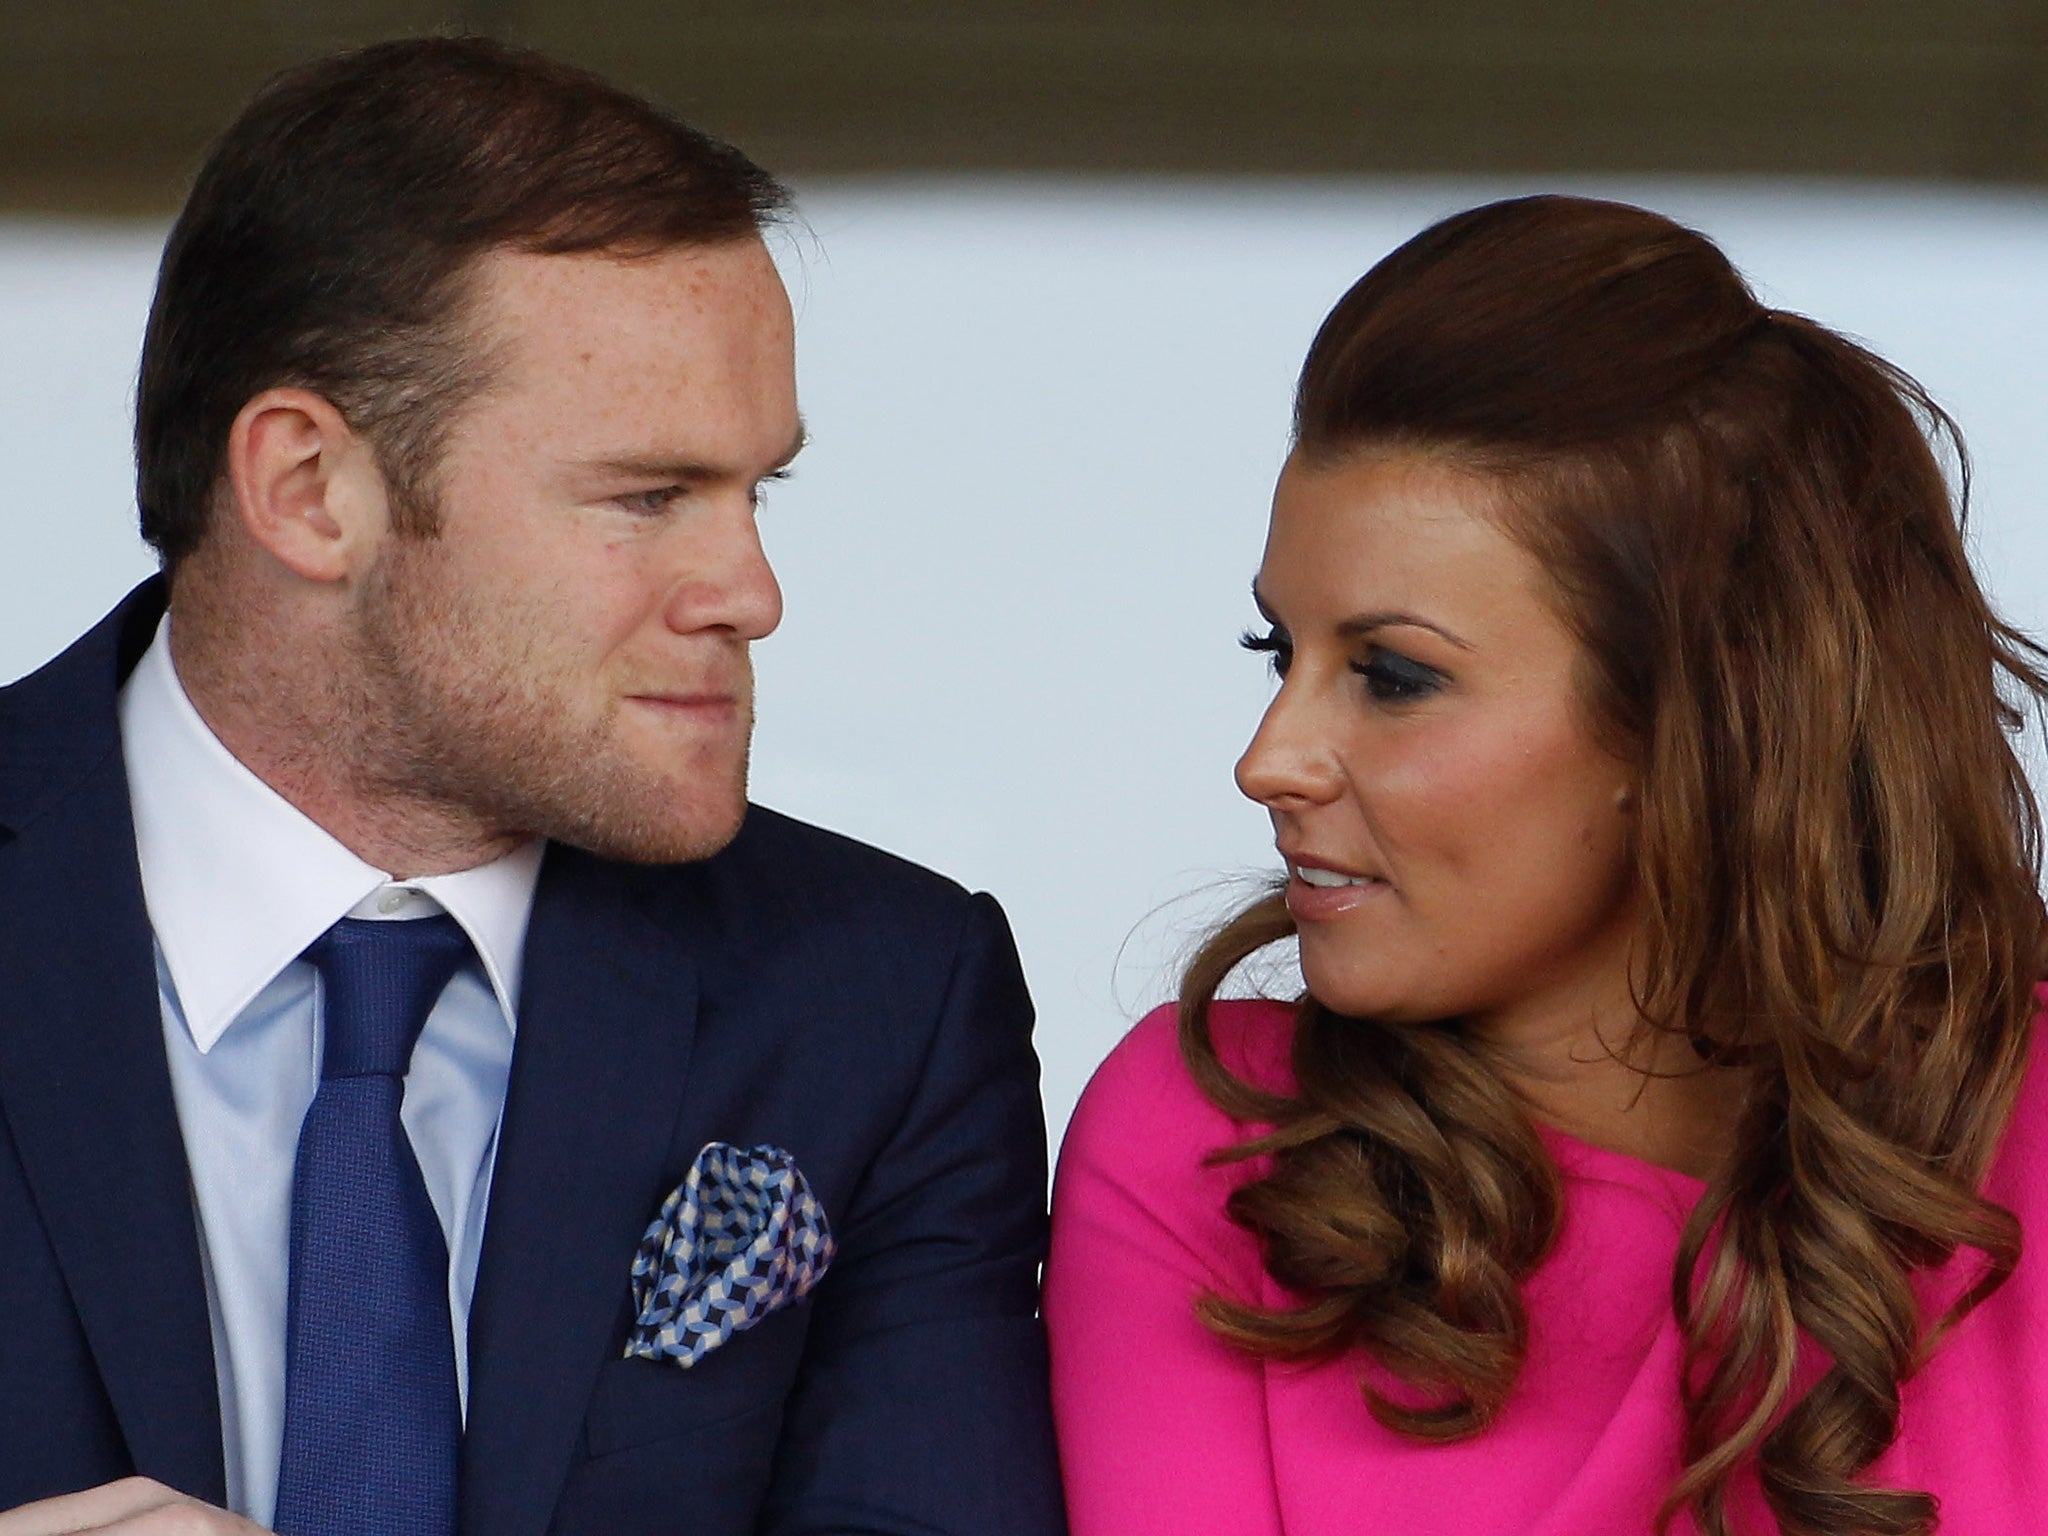 Wayne Rooney has admitted that he took poetry when wooing now-wife Coleen